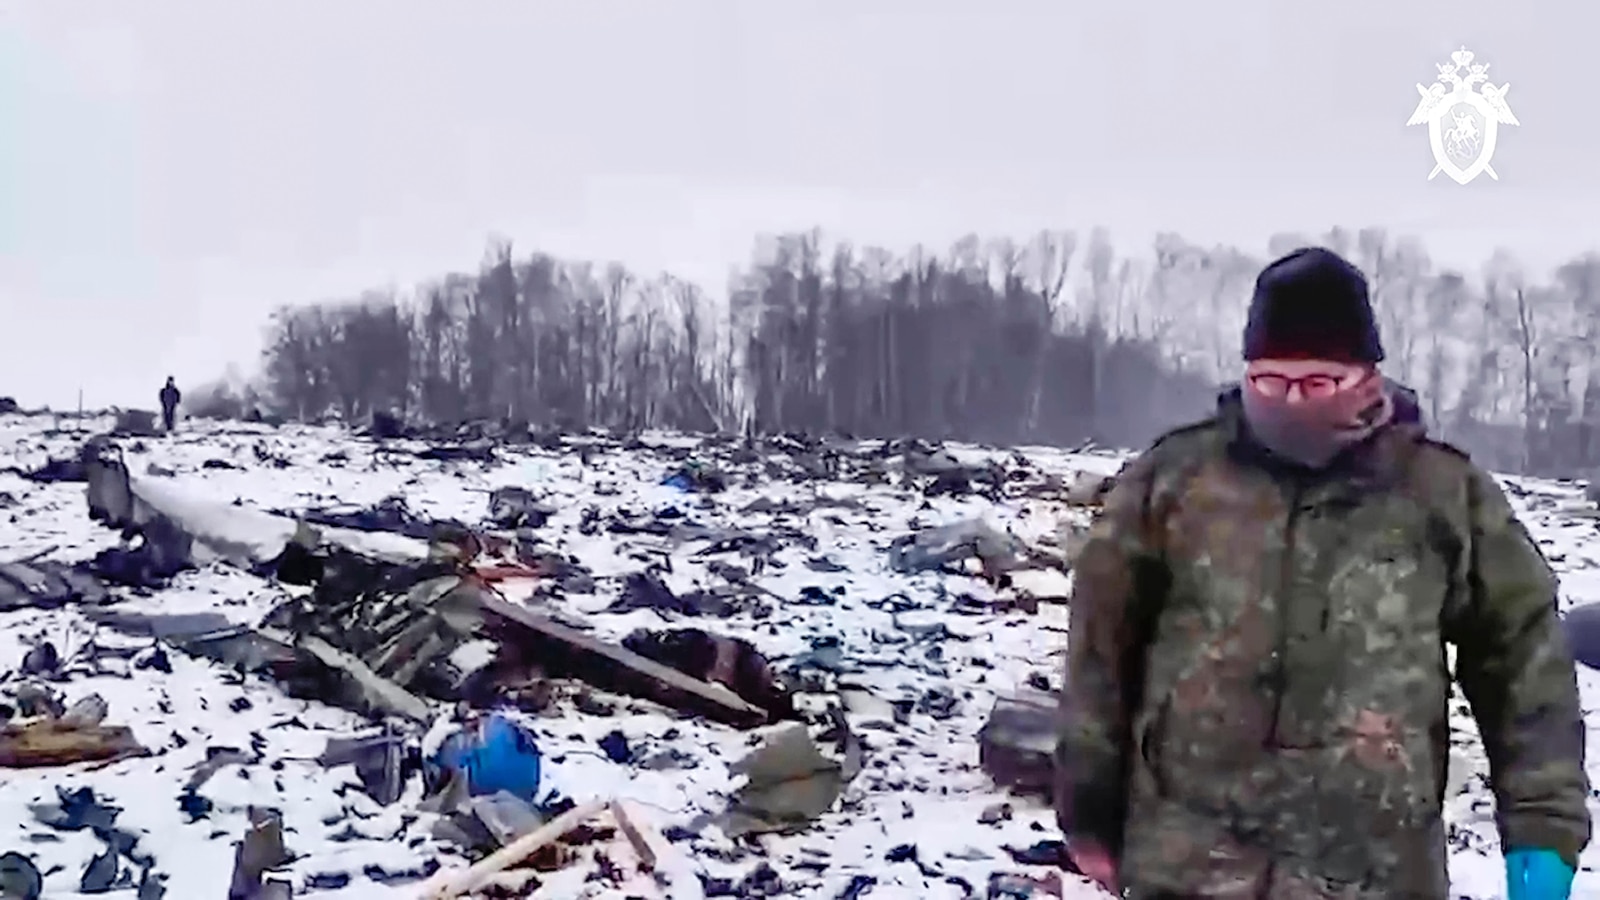 Russia Refuses to Hand Over Bodies of Plane Crash Victims, Ukraine Reports